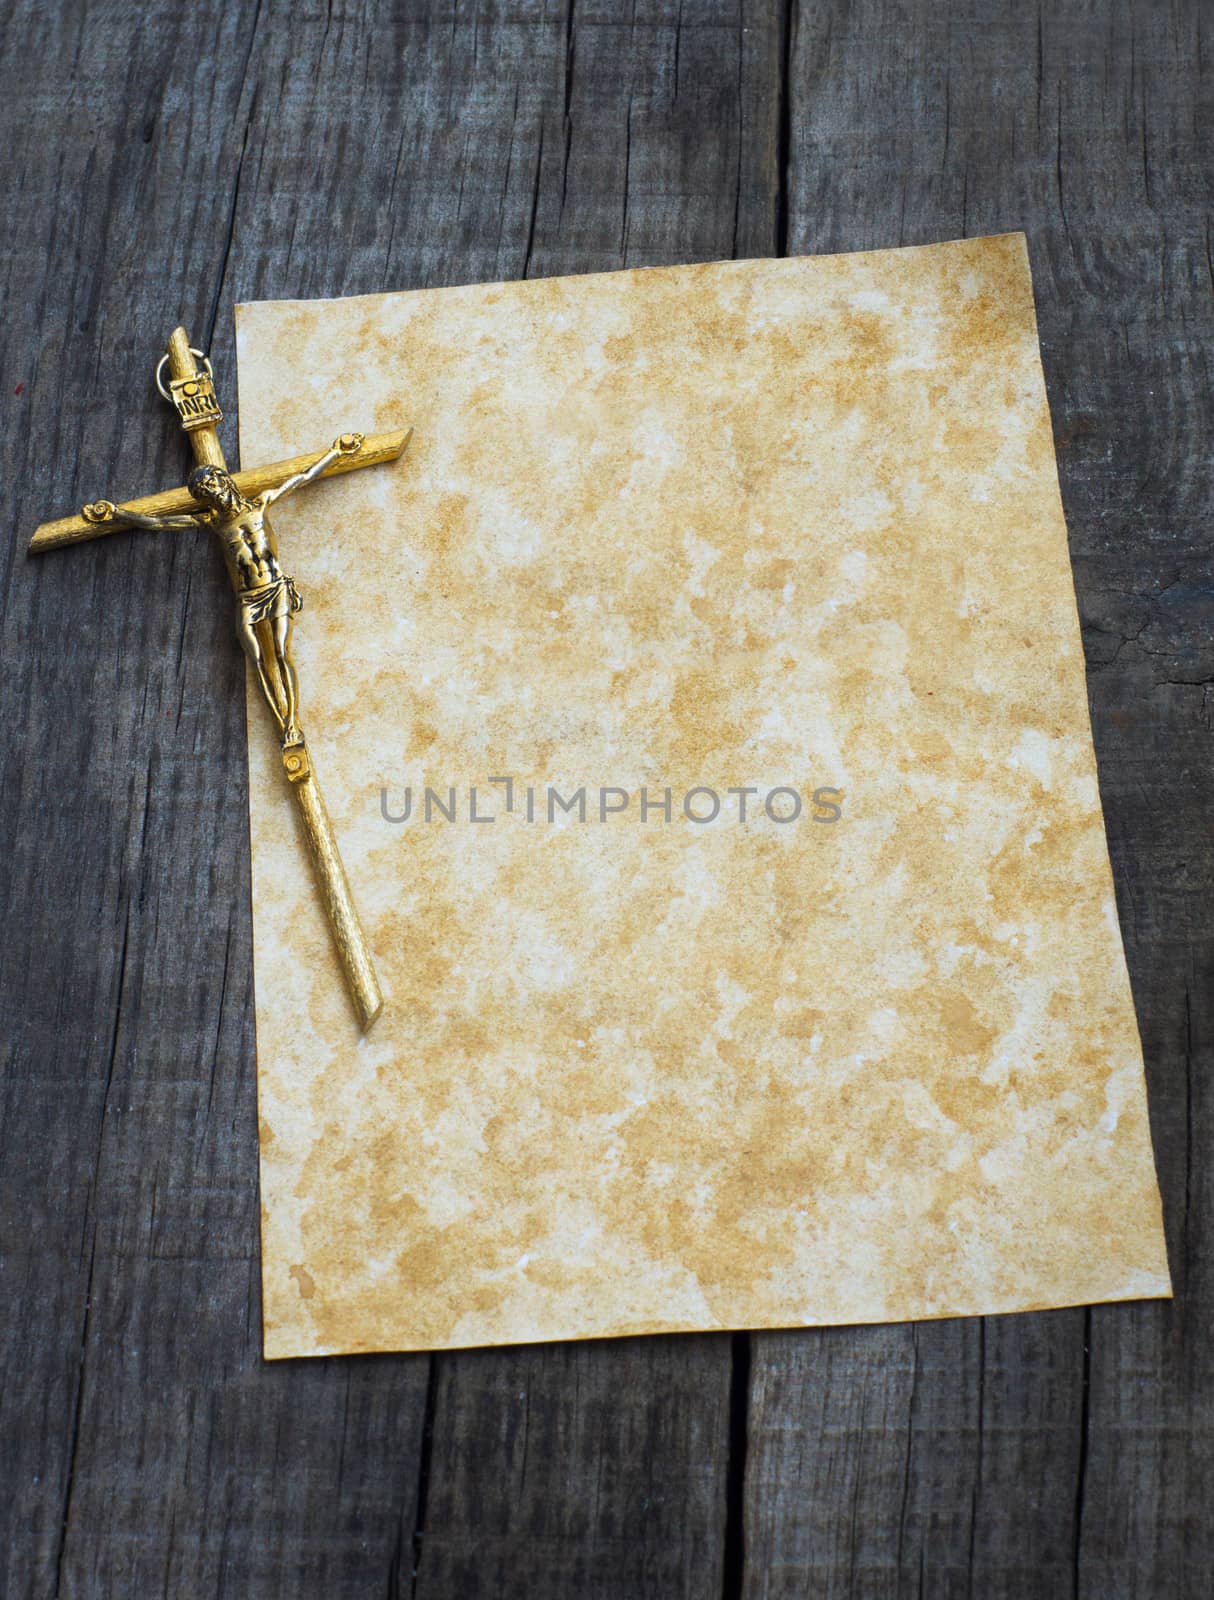 A stained paper with a Crucifix on wooden background